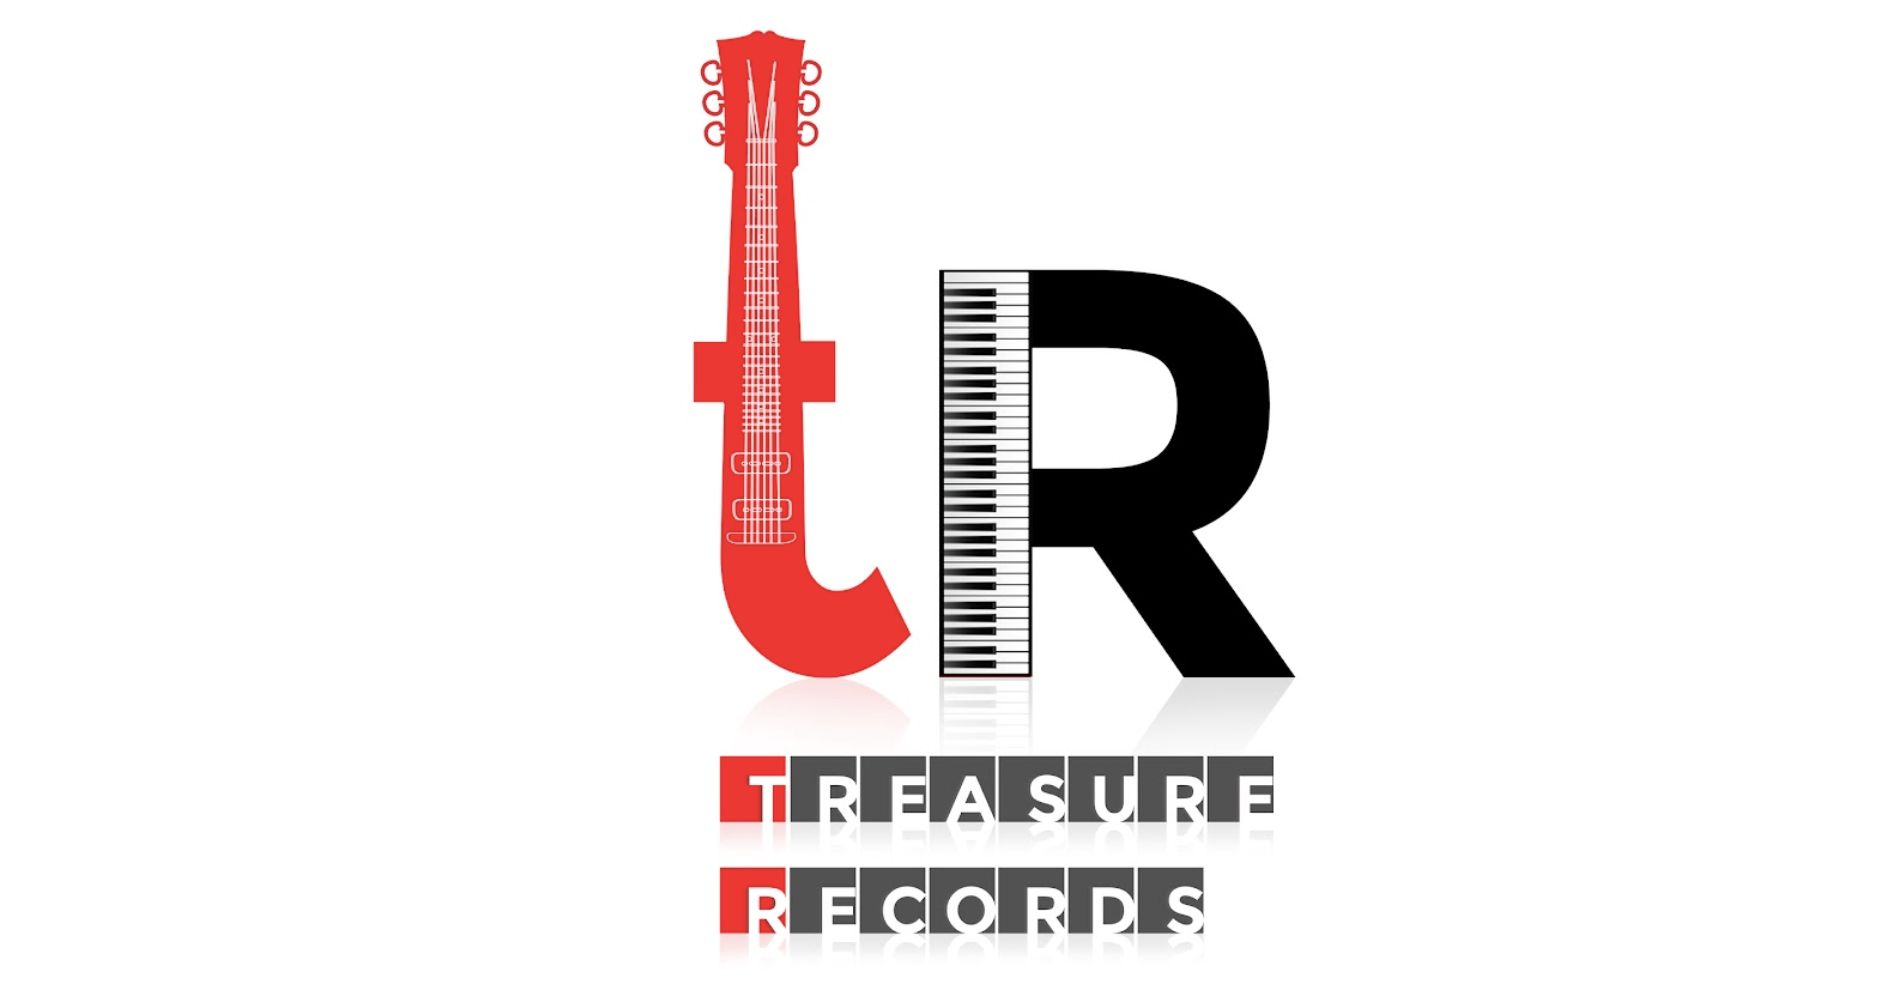 Music label company, 'Treasure Records' 2 million views on their